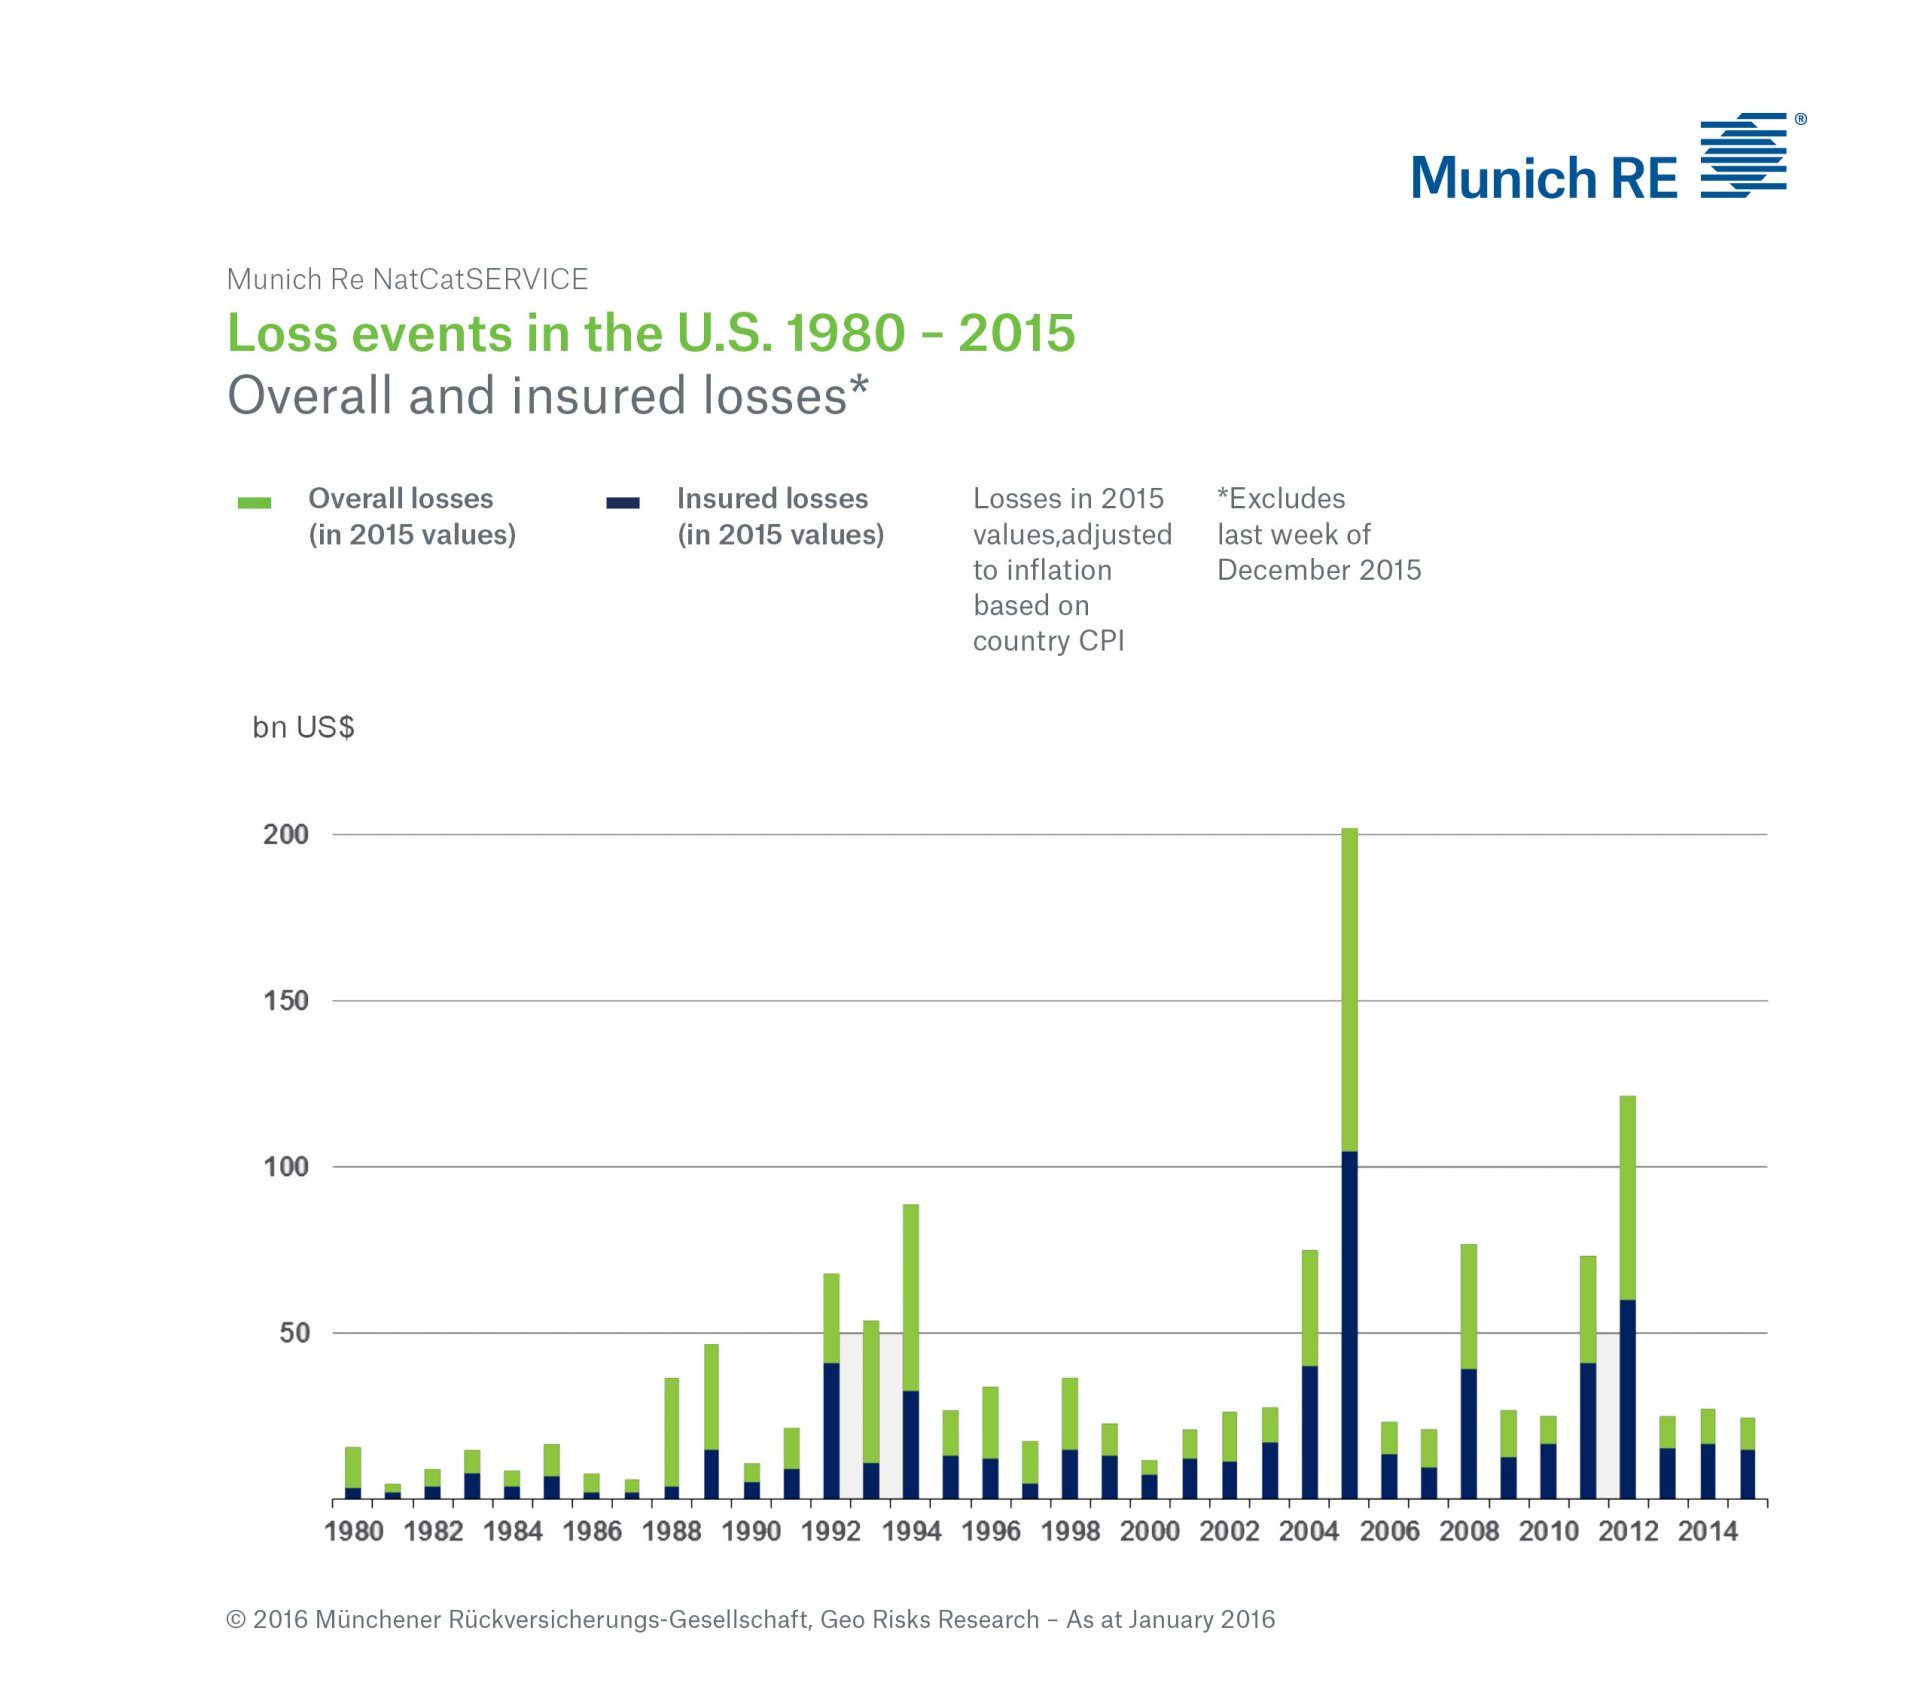 Loss events in the U.S. 1980 - 2015